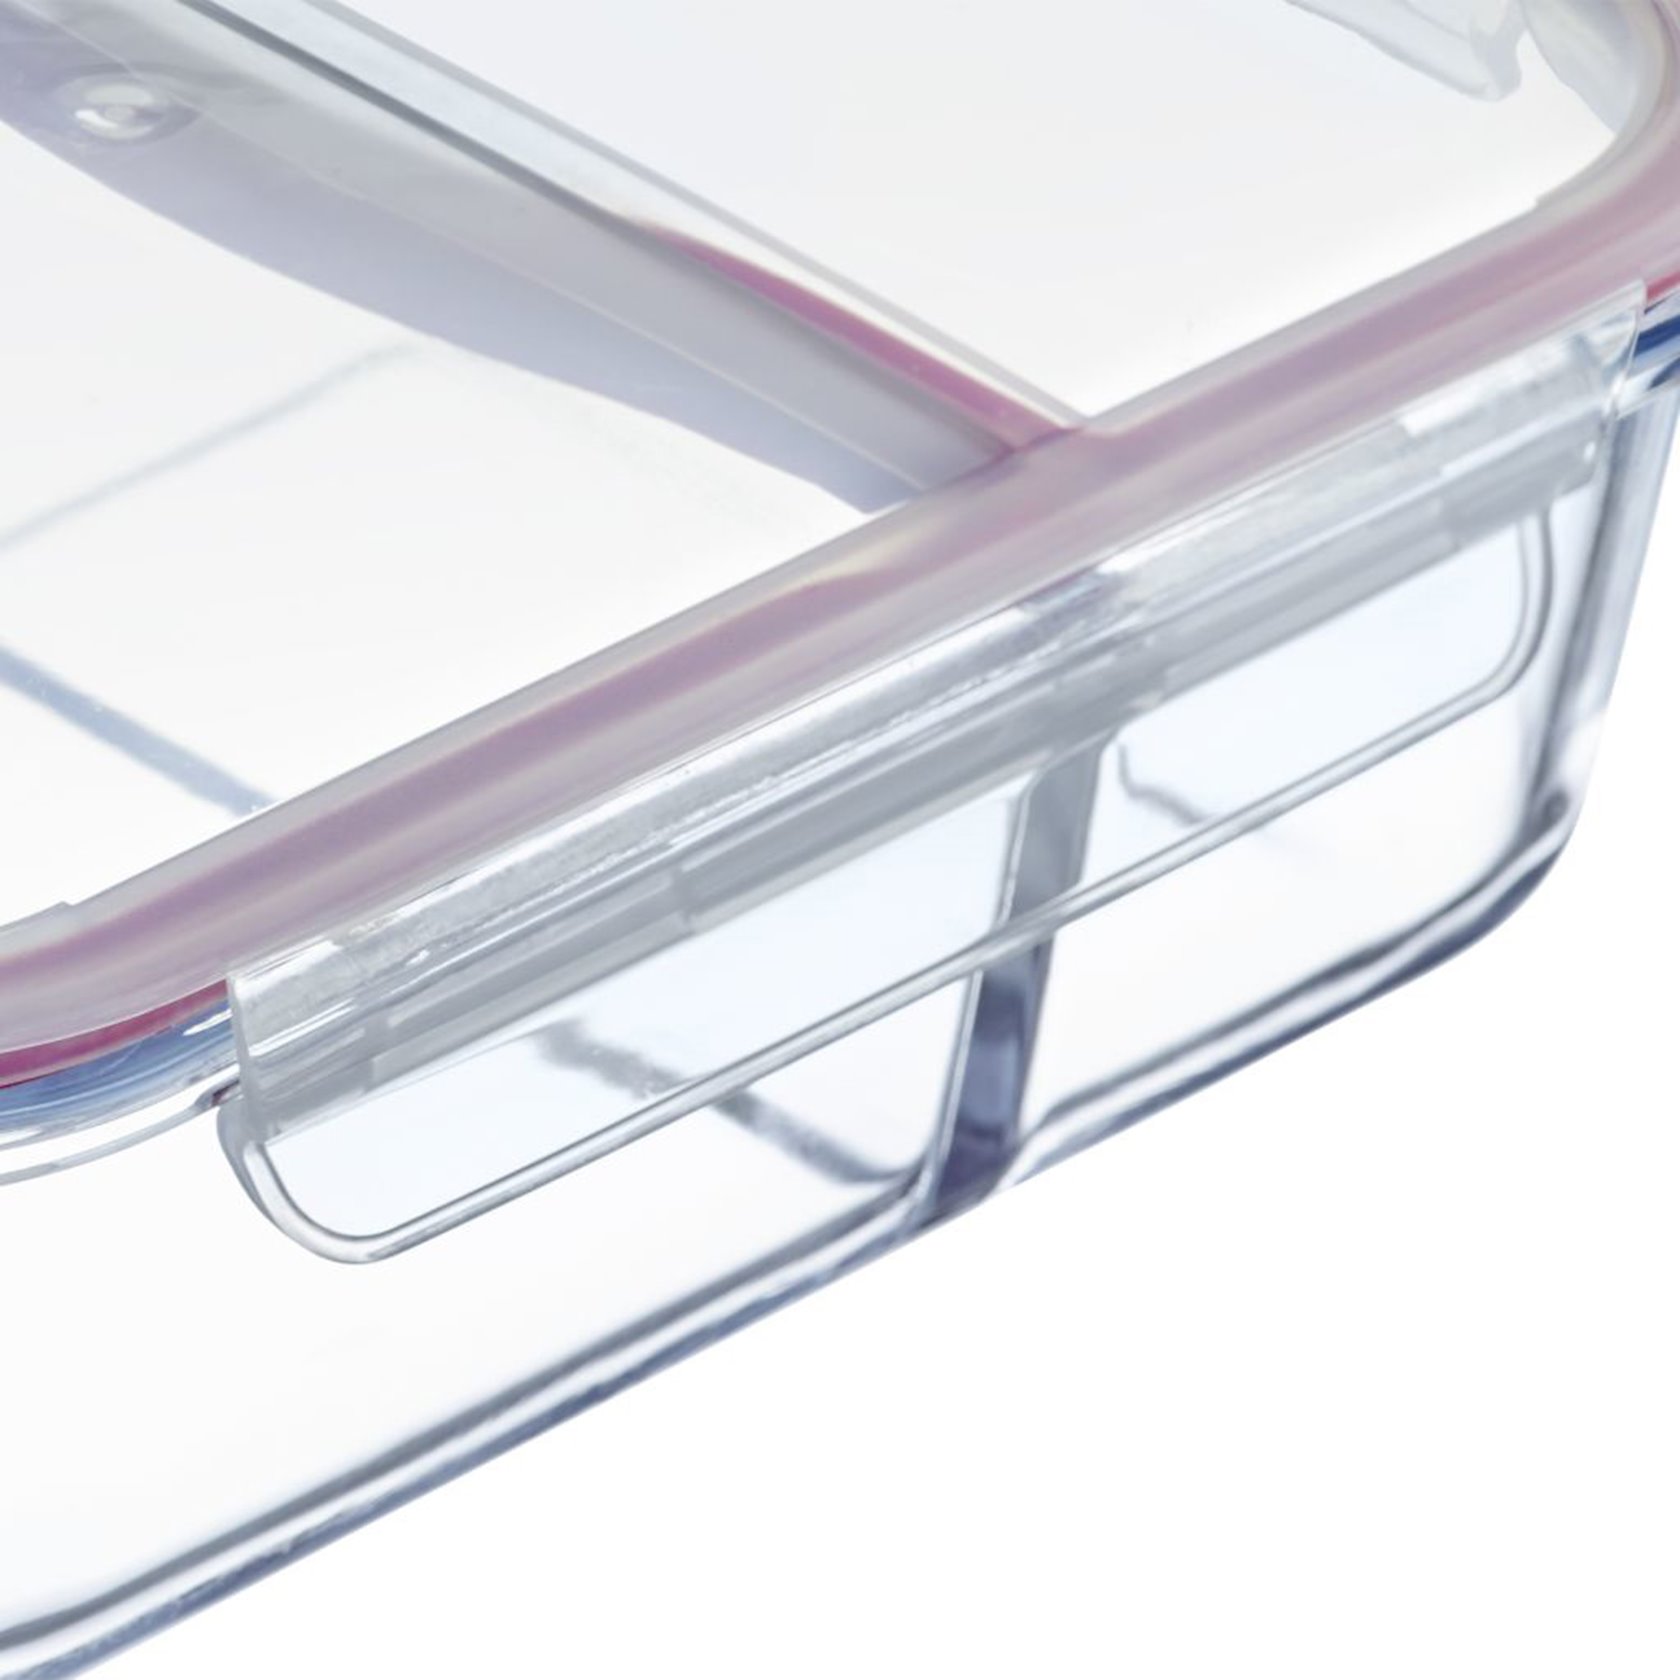 Glass food storage box 980 ml, with 2 separate compartments - Westmark Shop